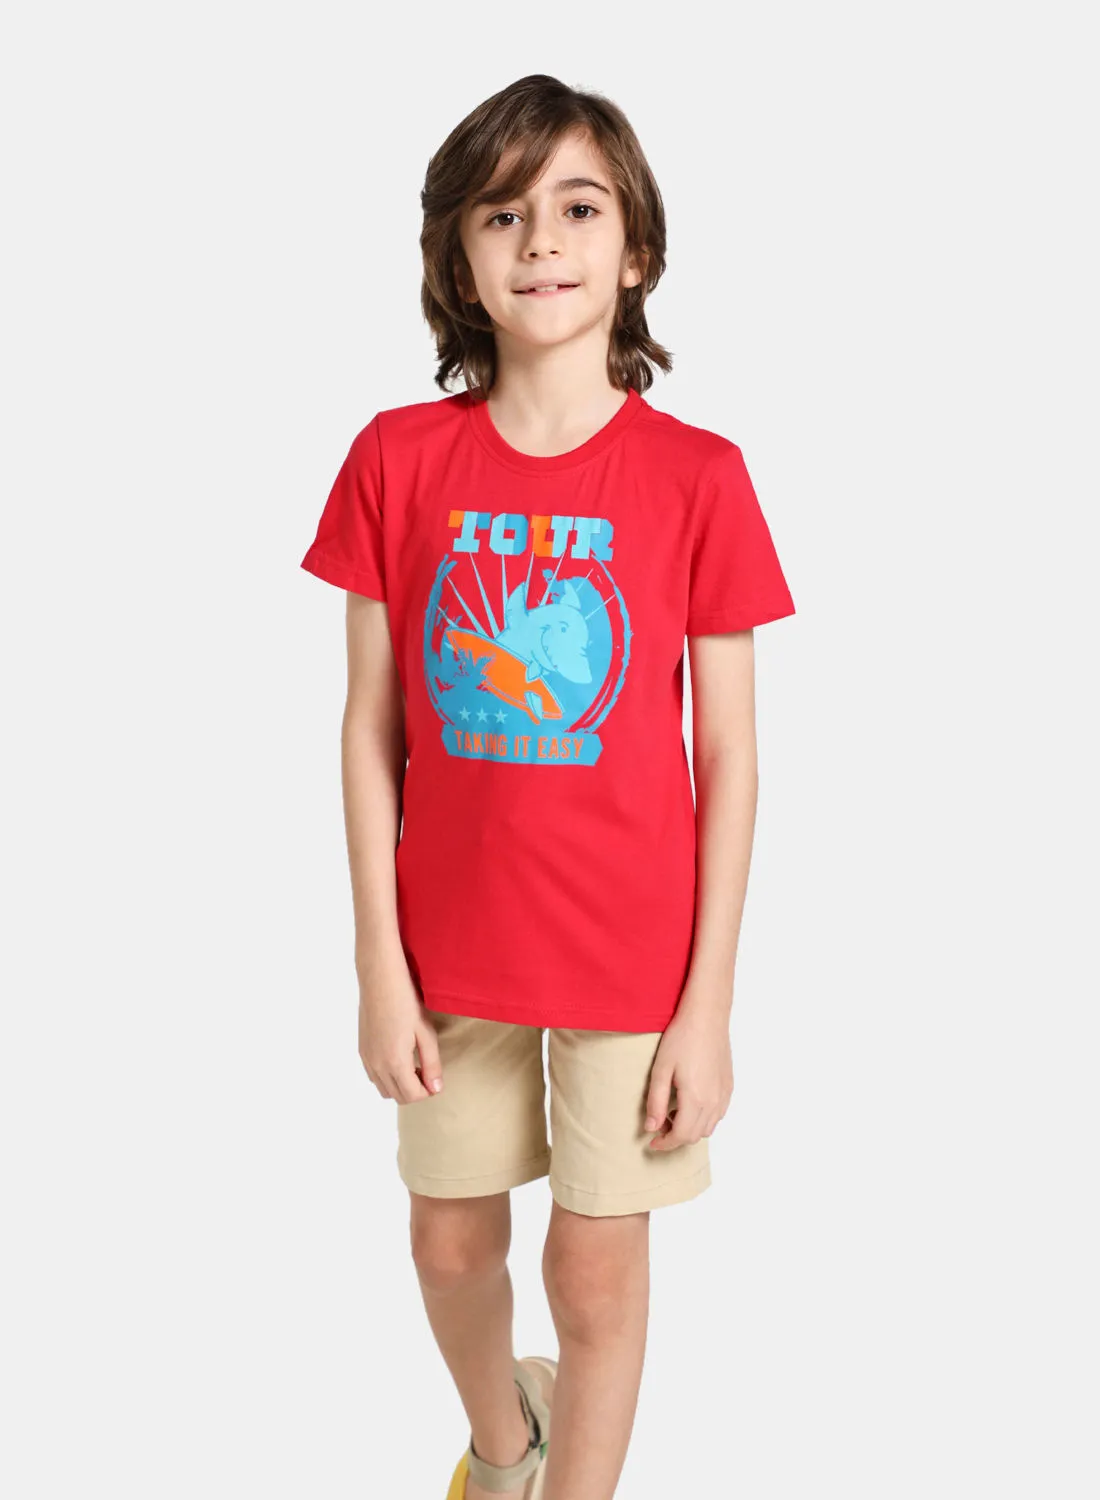 NEON Boys Round Neck Short Sleeve T-Shirt Primary Red